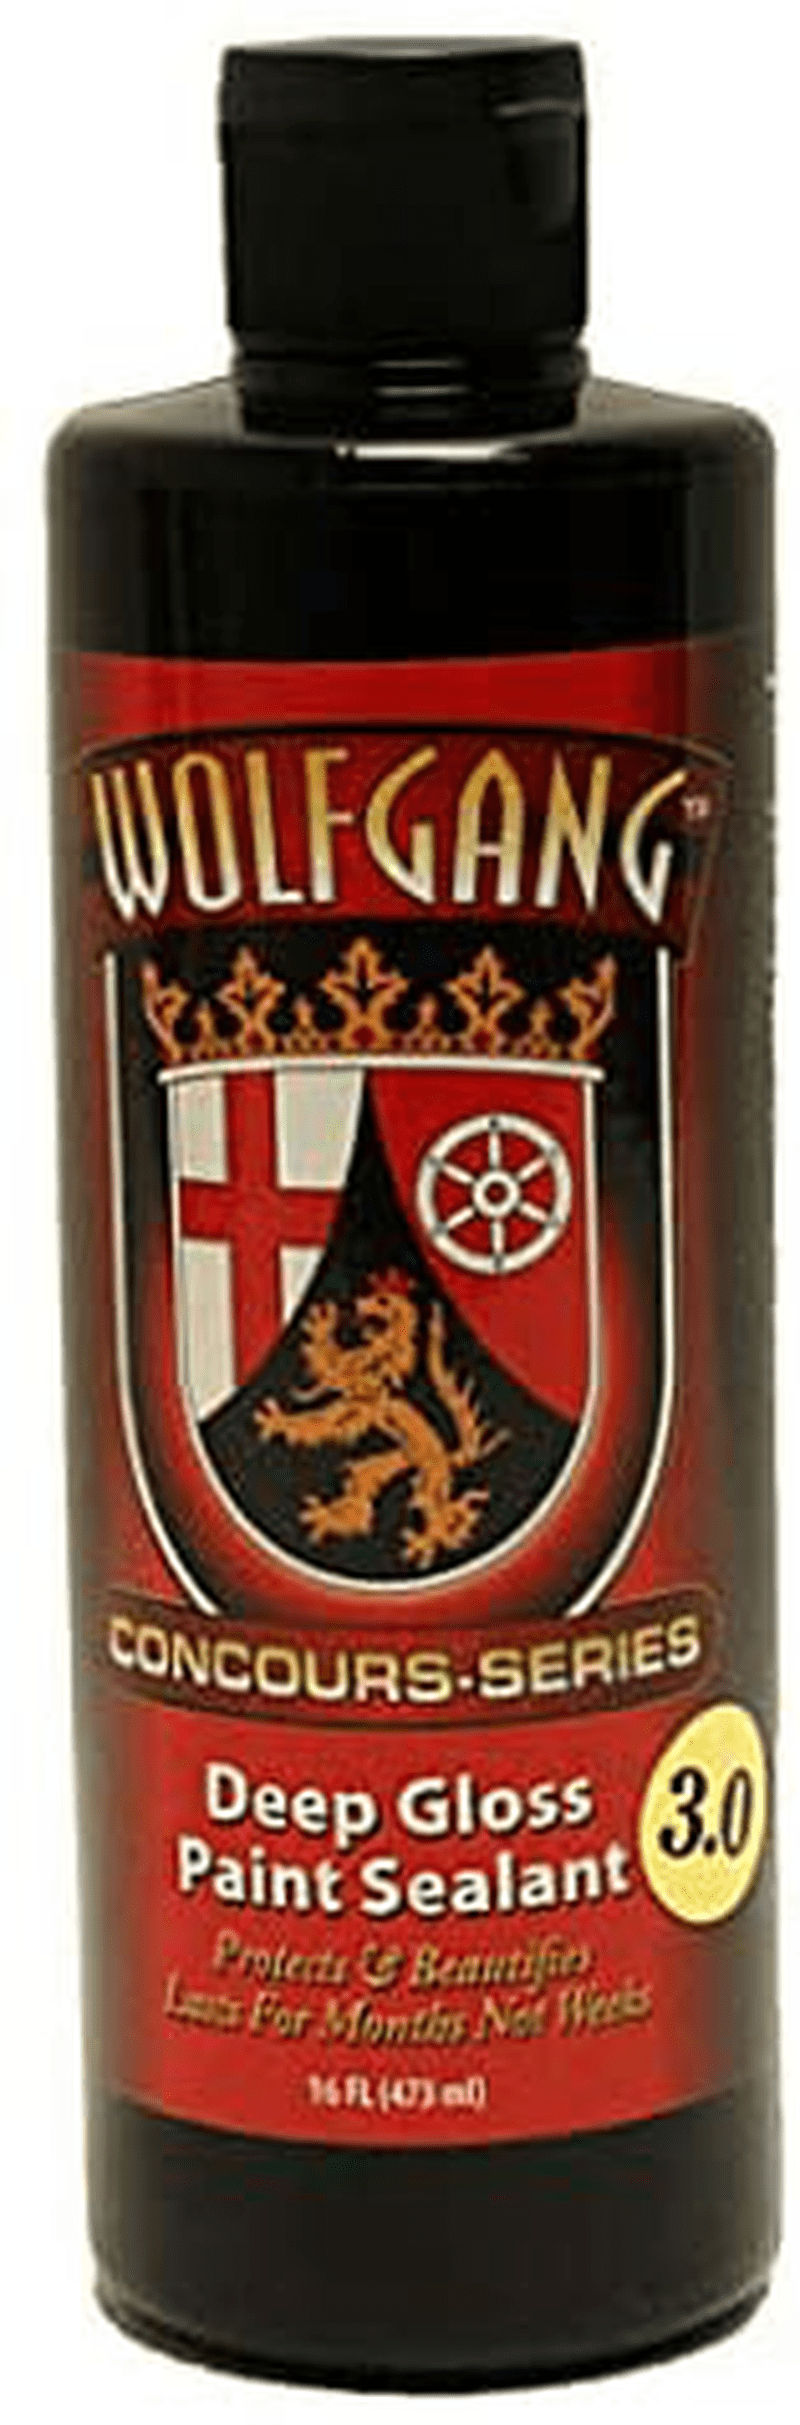 Wolfgang Concours Series WG-5500 Deep Gloss Paint Sealant 3.0, 16 fl. oz.  WOLFGANG CONCOURS SERIES 16 fl. oz.  